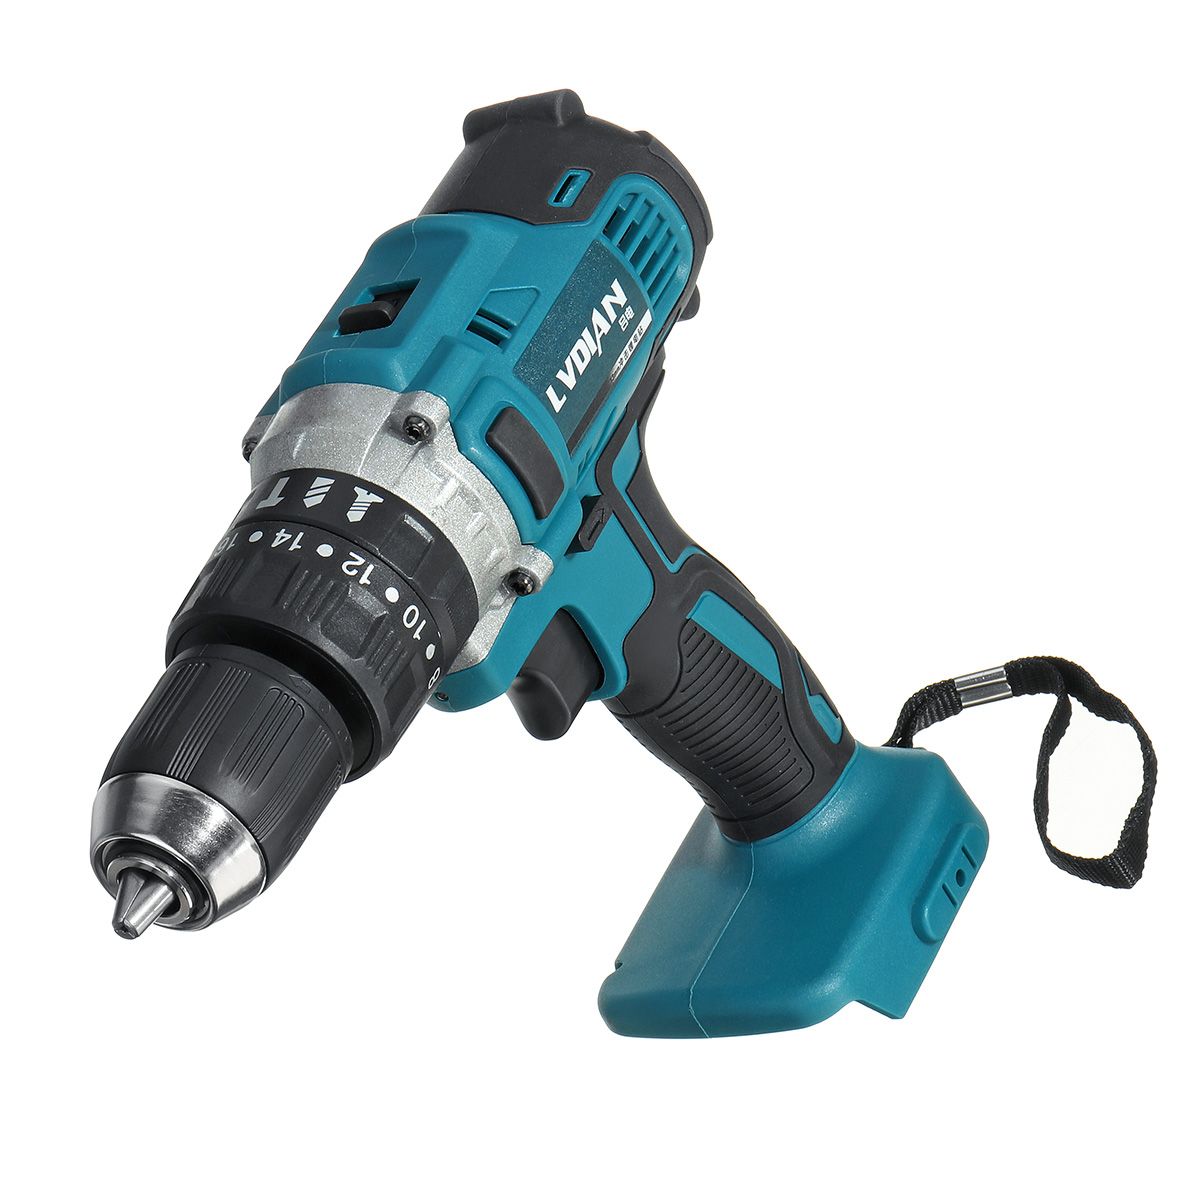 18V-3-In-1-Cordless-Impact-Drill-2-Speed-Rechargable-Electric-Screwdriver-Drill-Li-Ion-Battery-Adapt-1602641